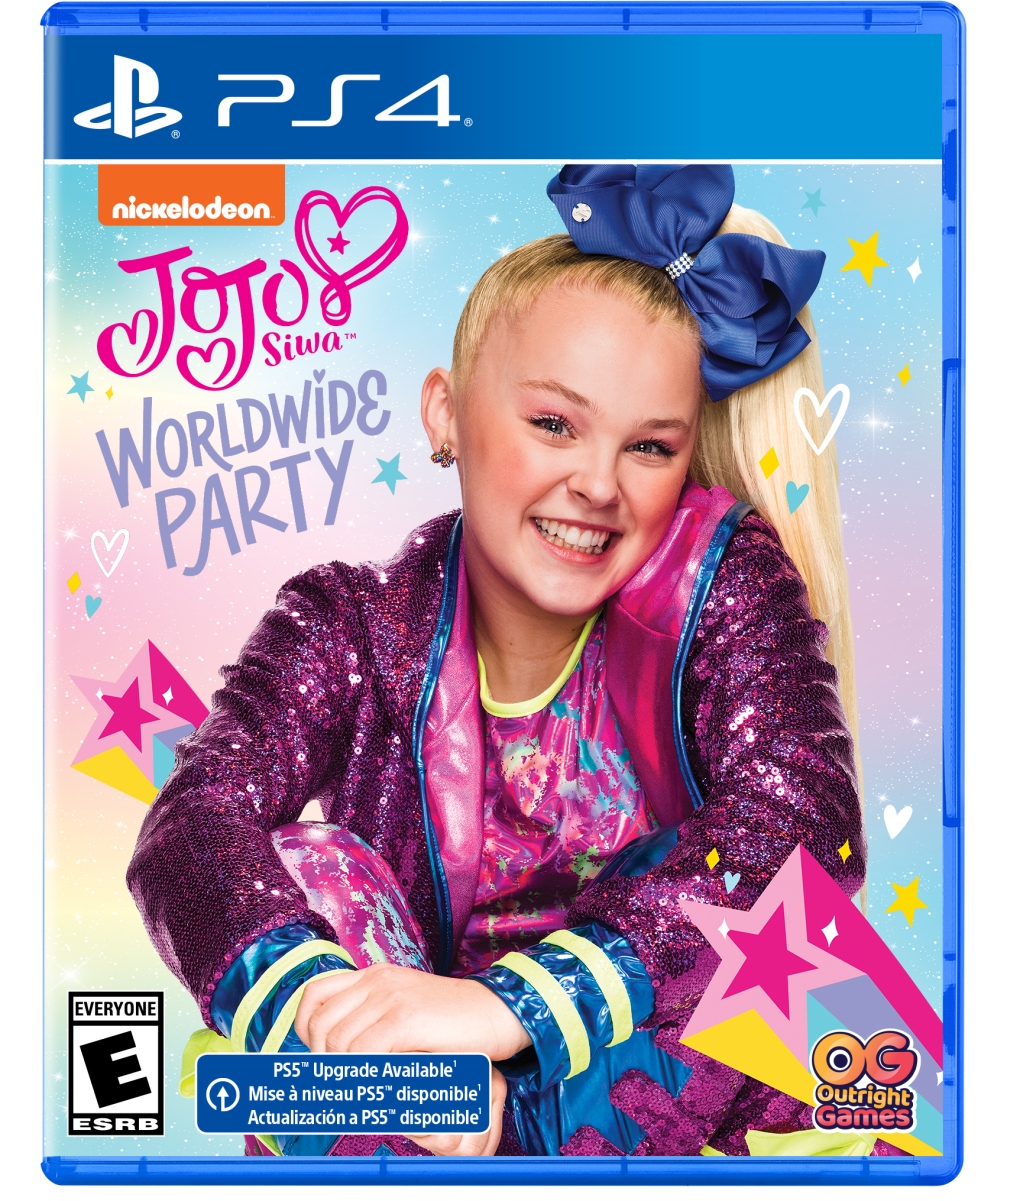 JoJo Siwa: Worldwide Party, PlayStation 4, Outright Games, 819338021492 